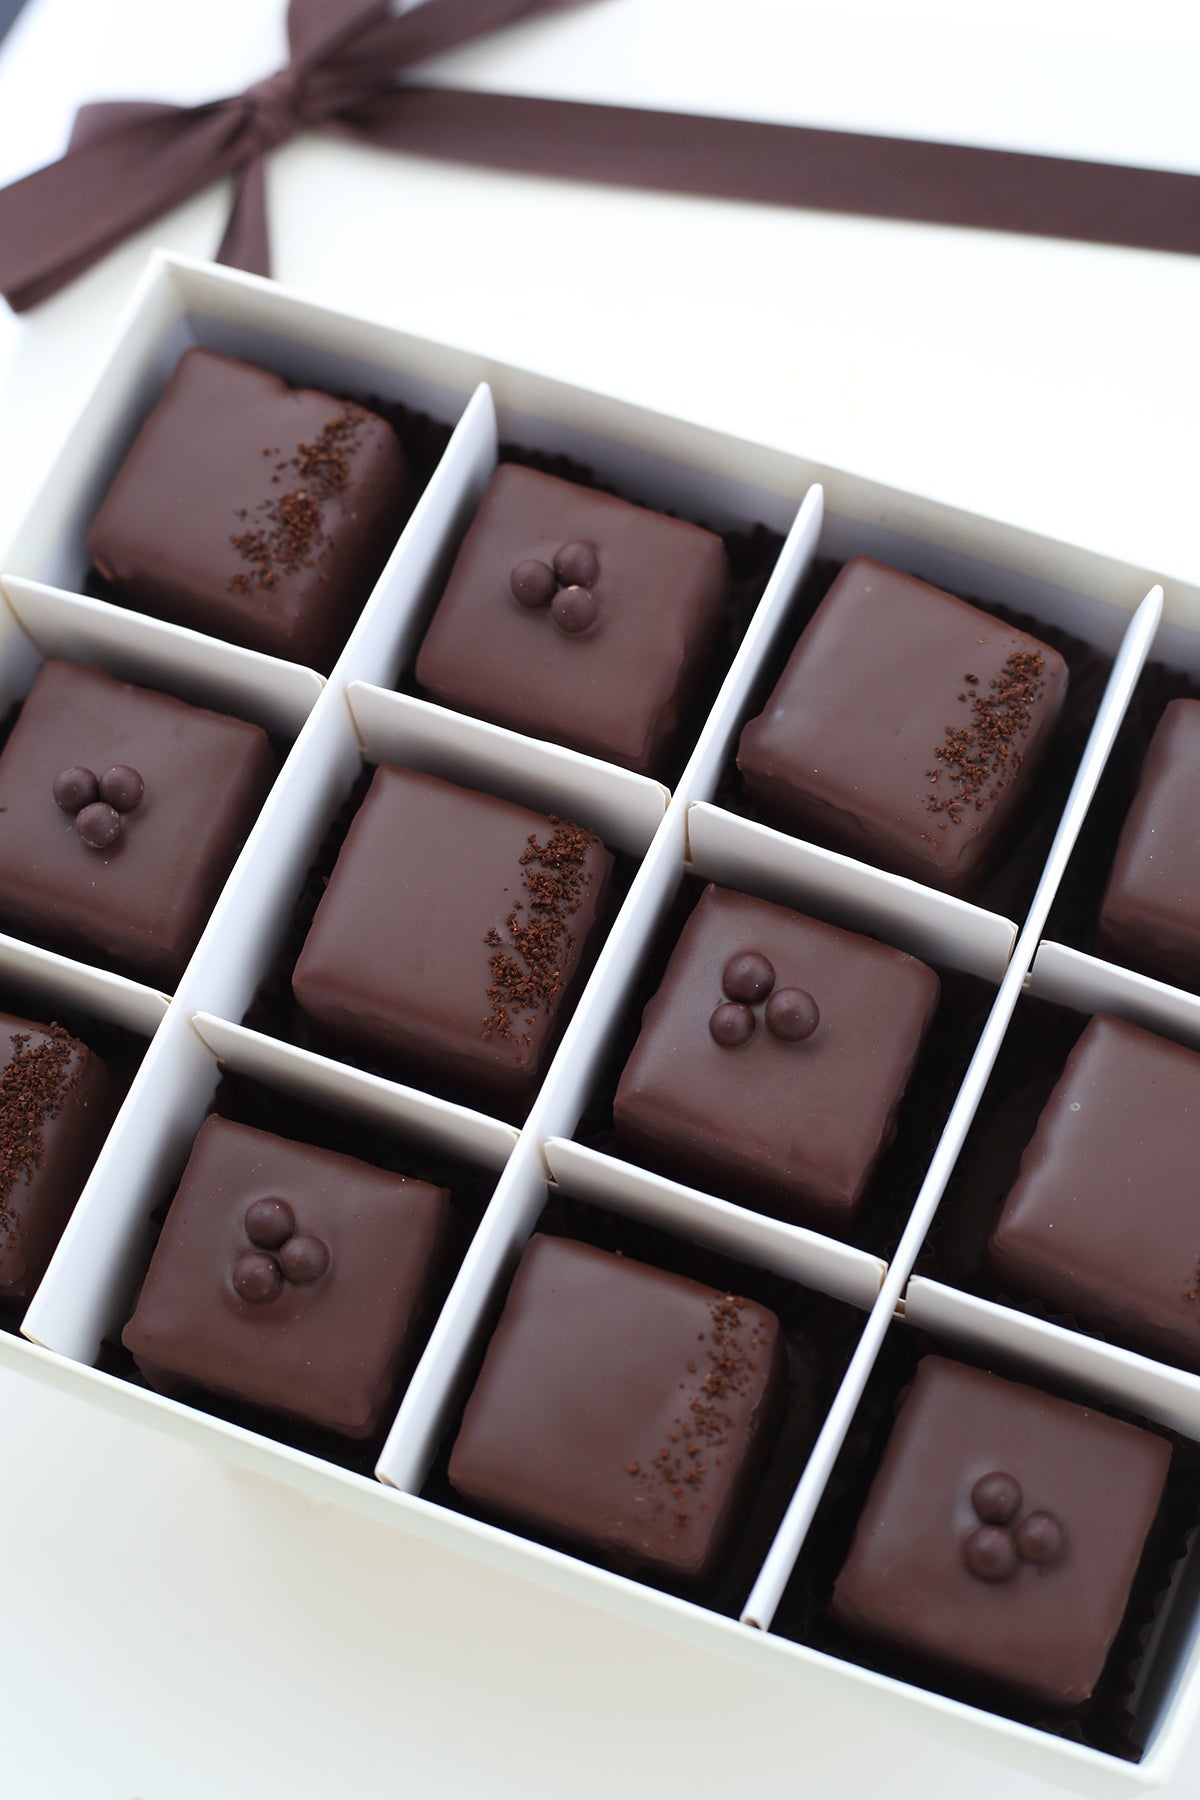 A box of 12 chocolate-covered petits fours arranged in three rows. Some are topped with chocolate beads, others with coffee grounds.